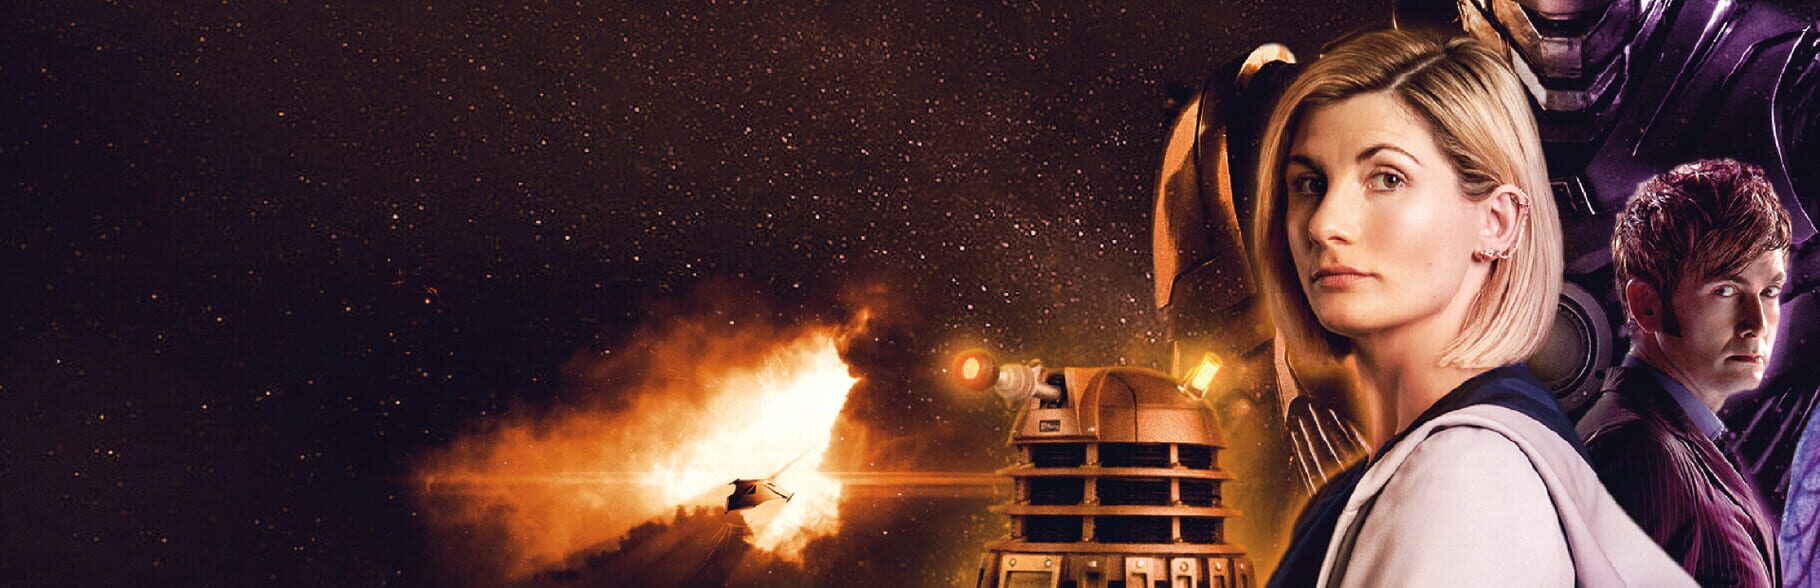 Doctor Who: The Edge of Reality artwork